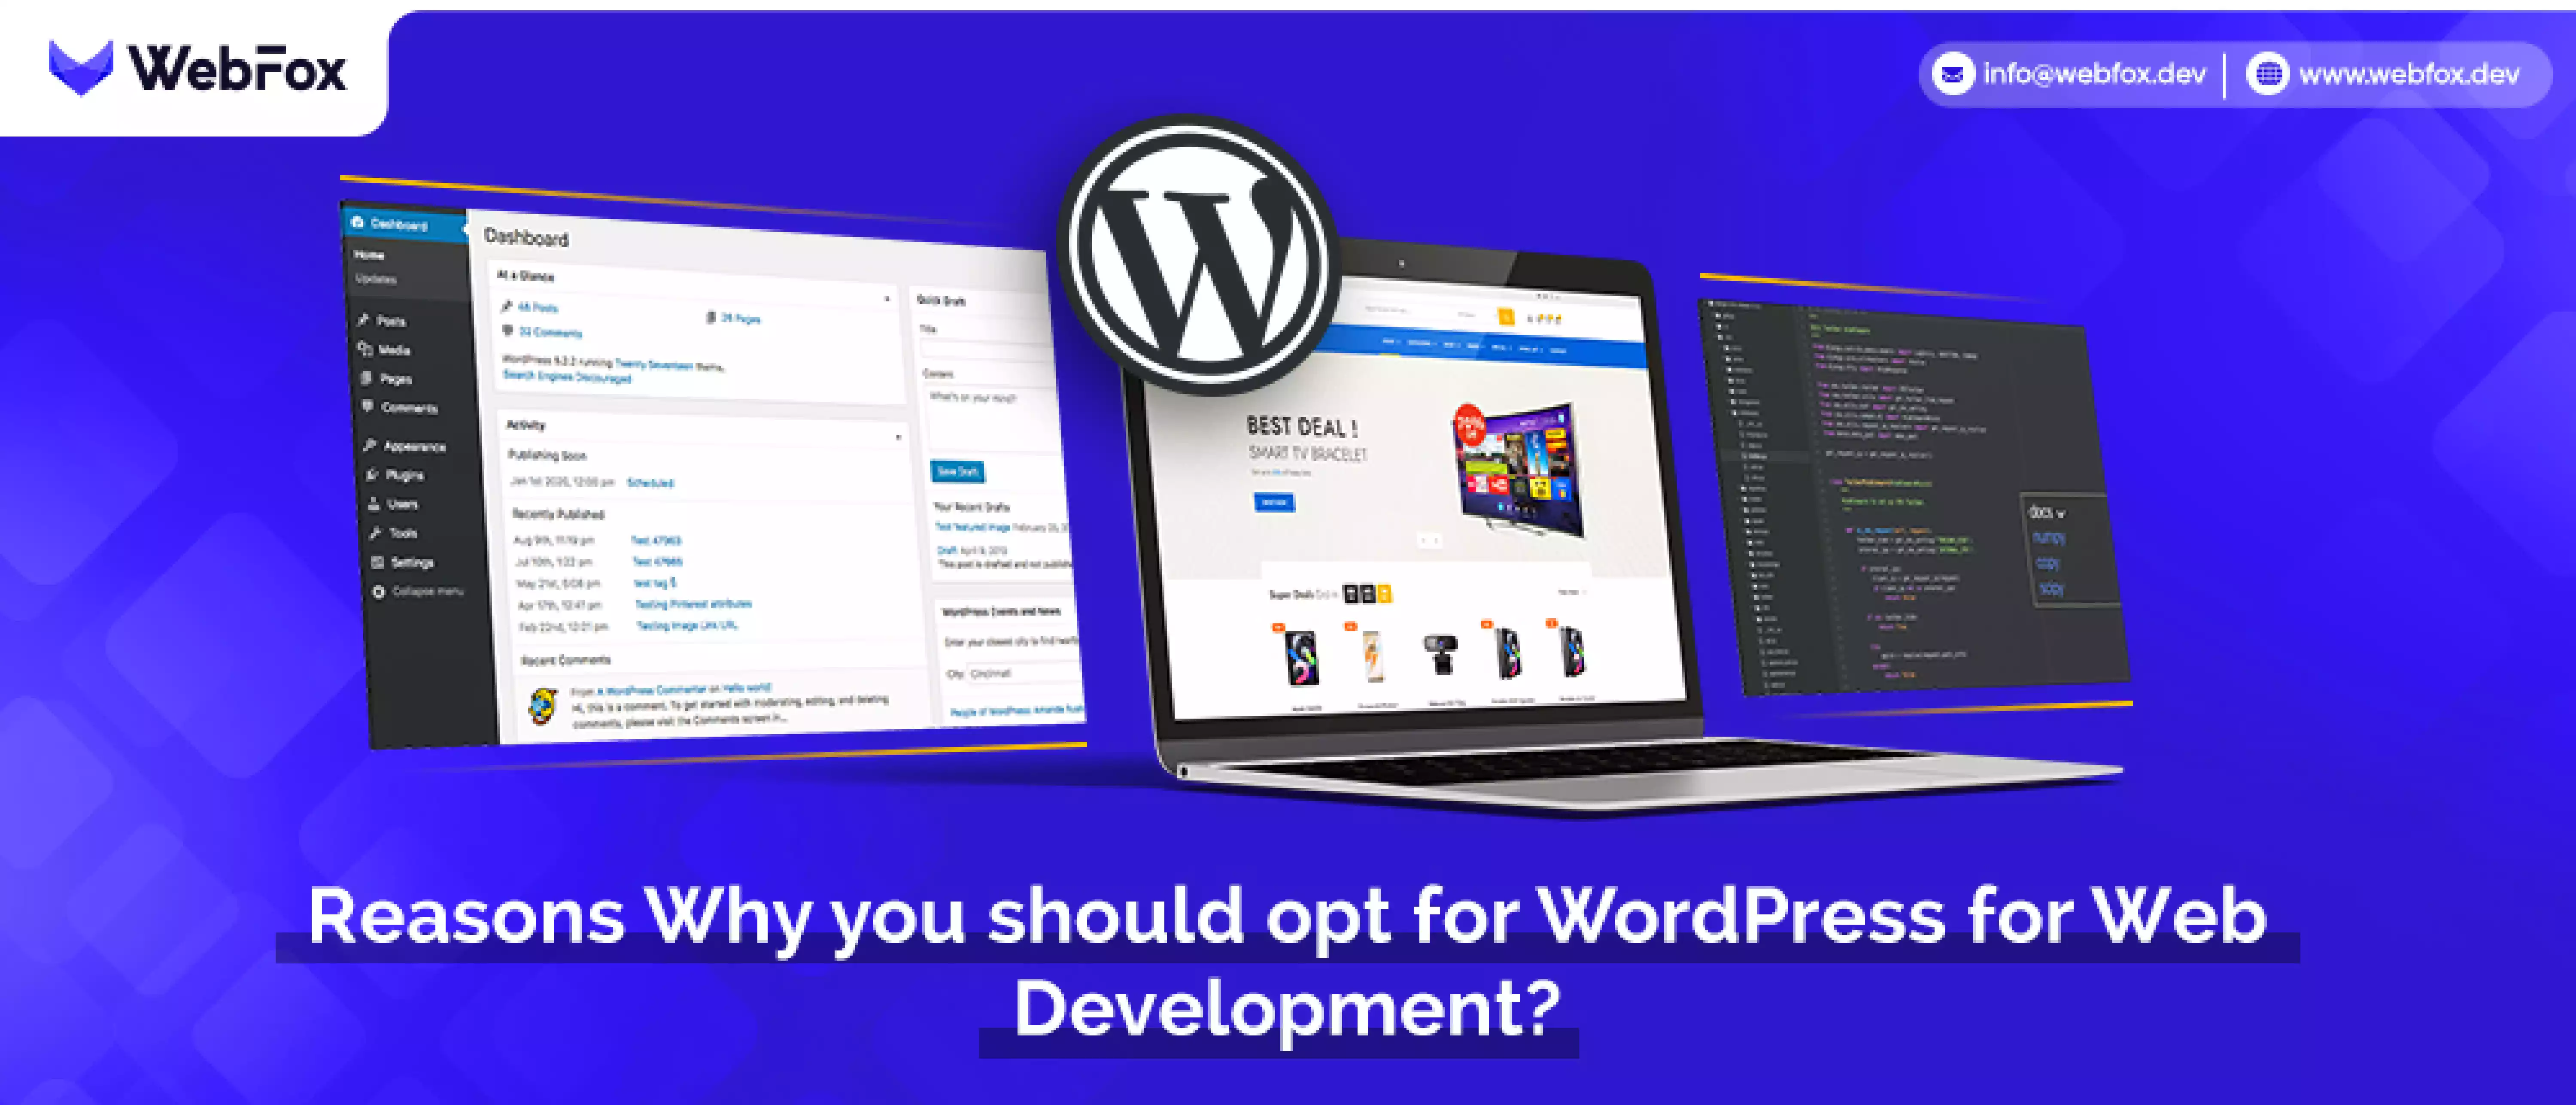 Reasons Why you should opt for WordPress for Web Development